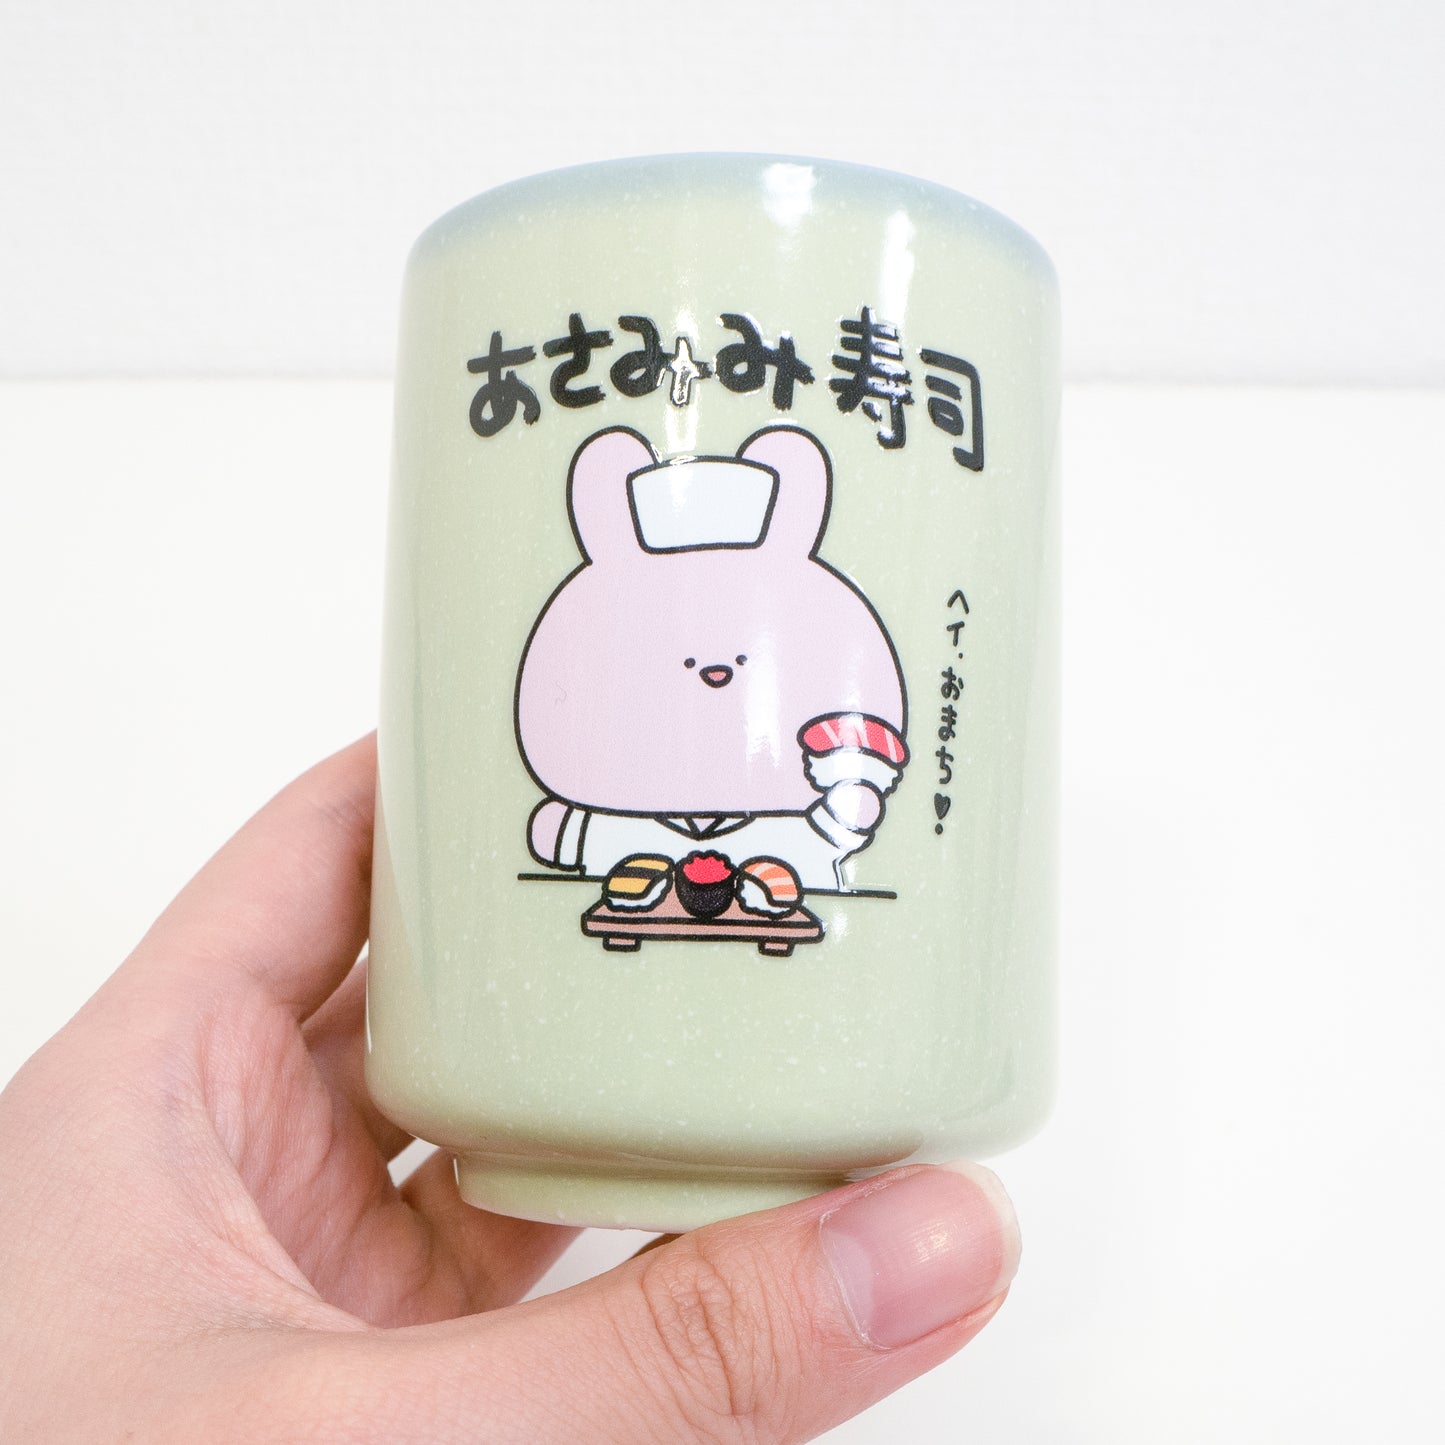 [Asamimi-chan] Teacup (Asamimi Sushi) [Shipped in mid-August]